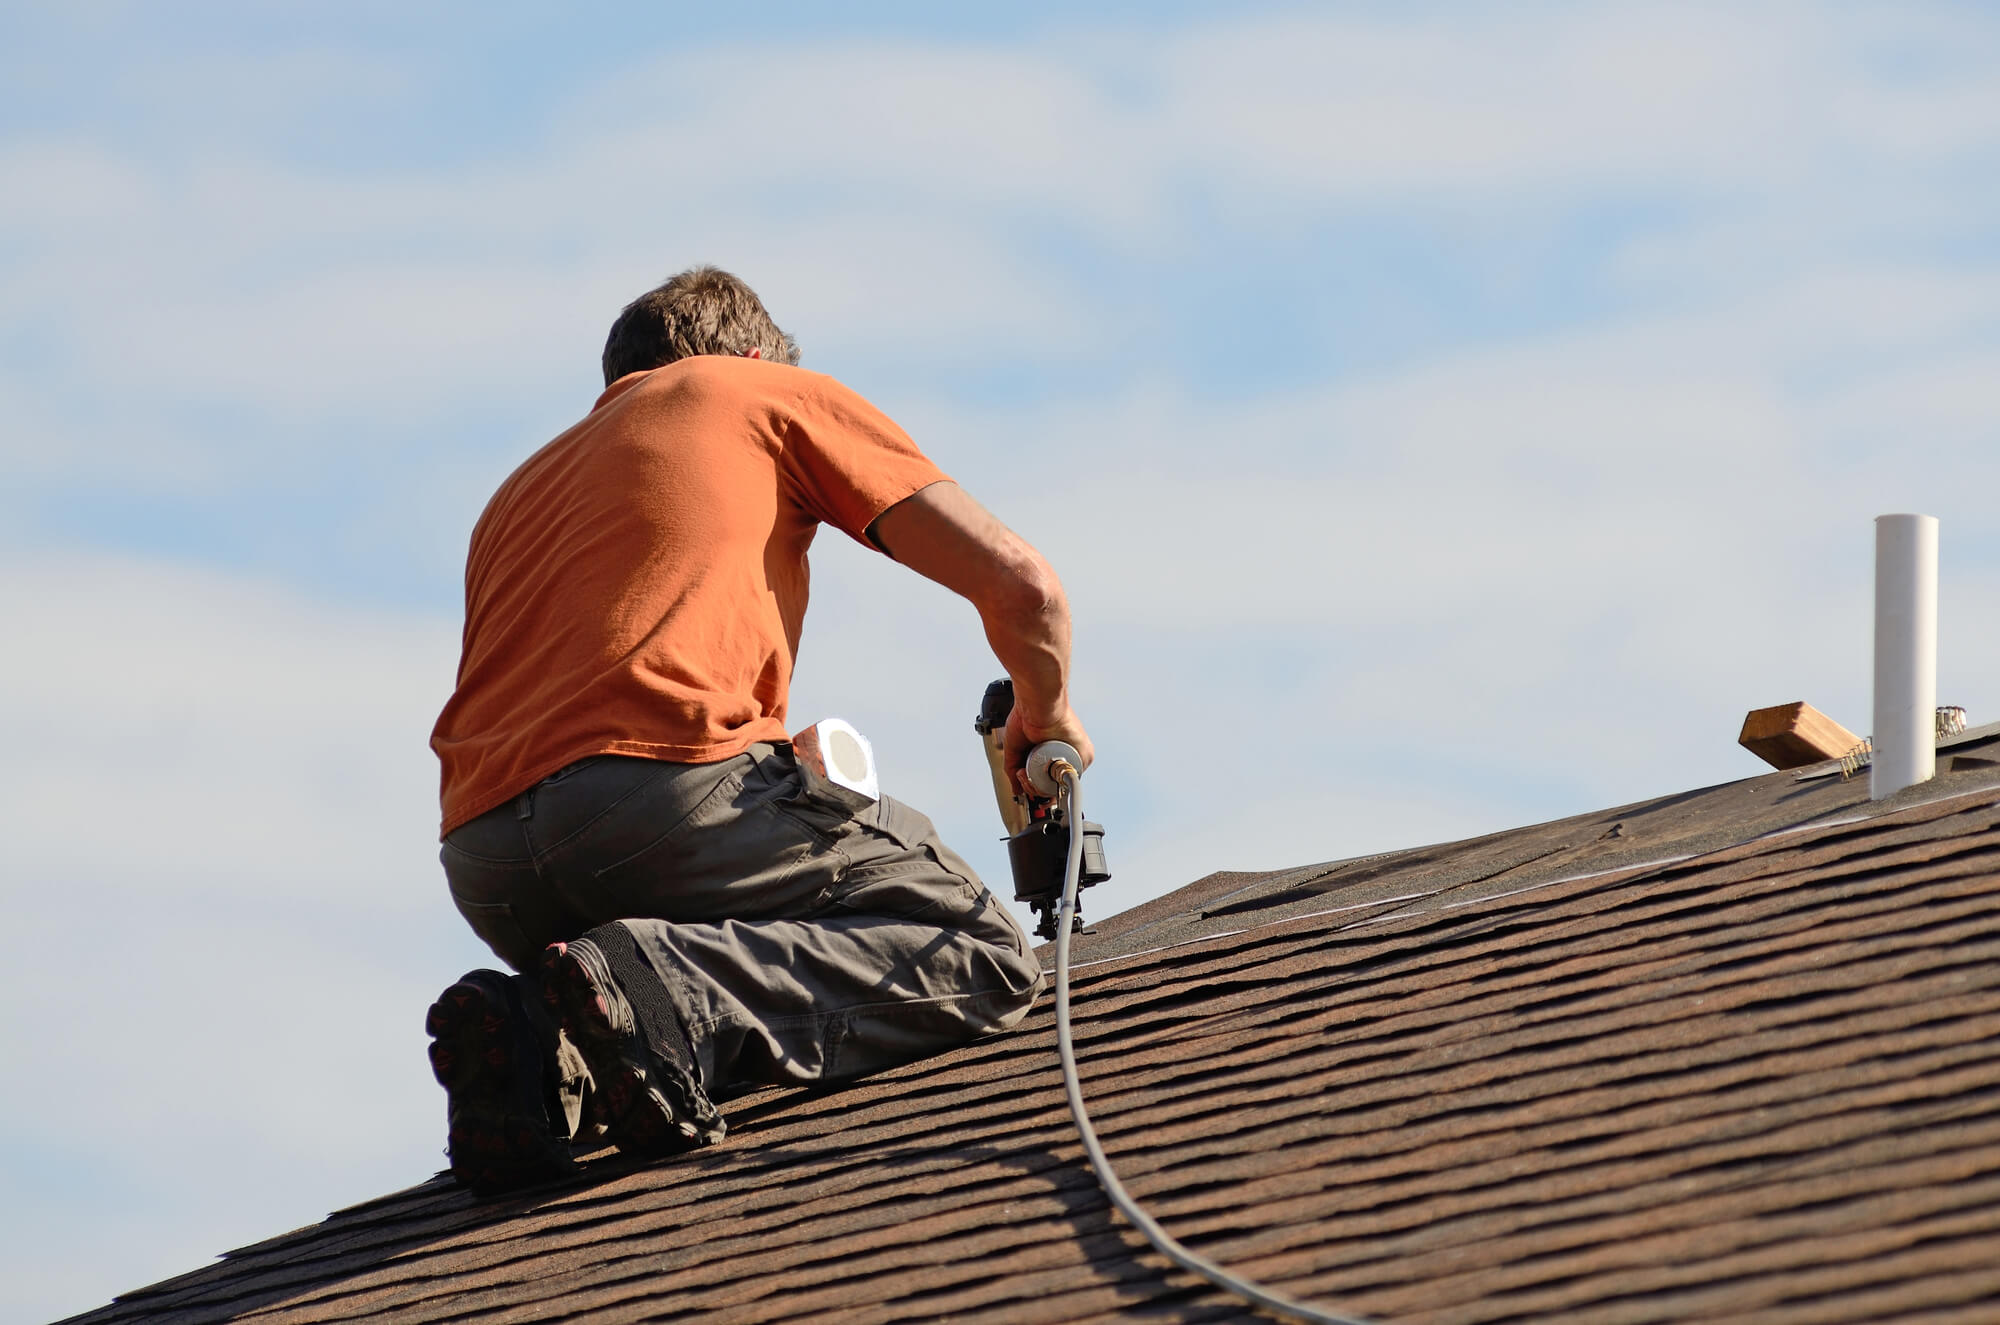 commercial roofing expert in texas installing a roof